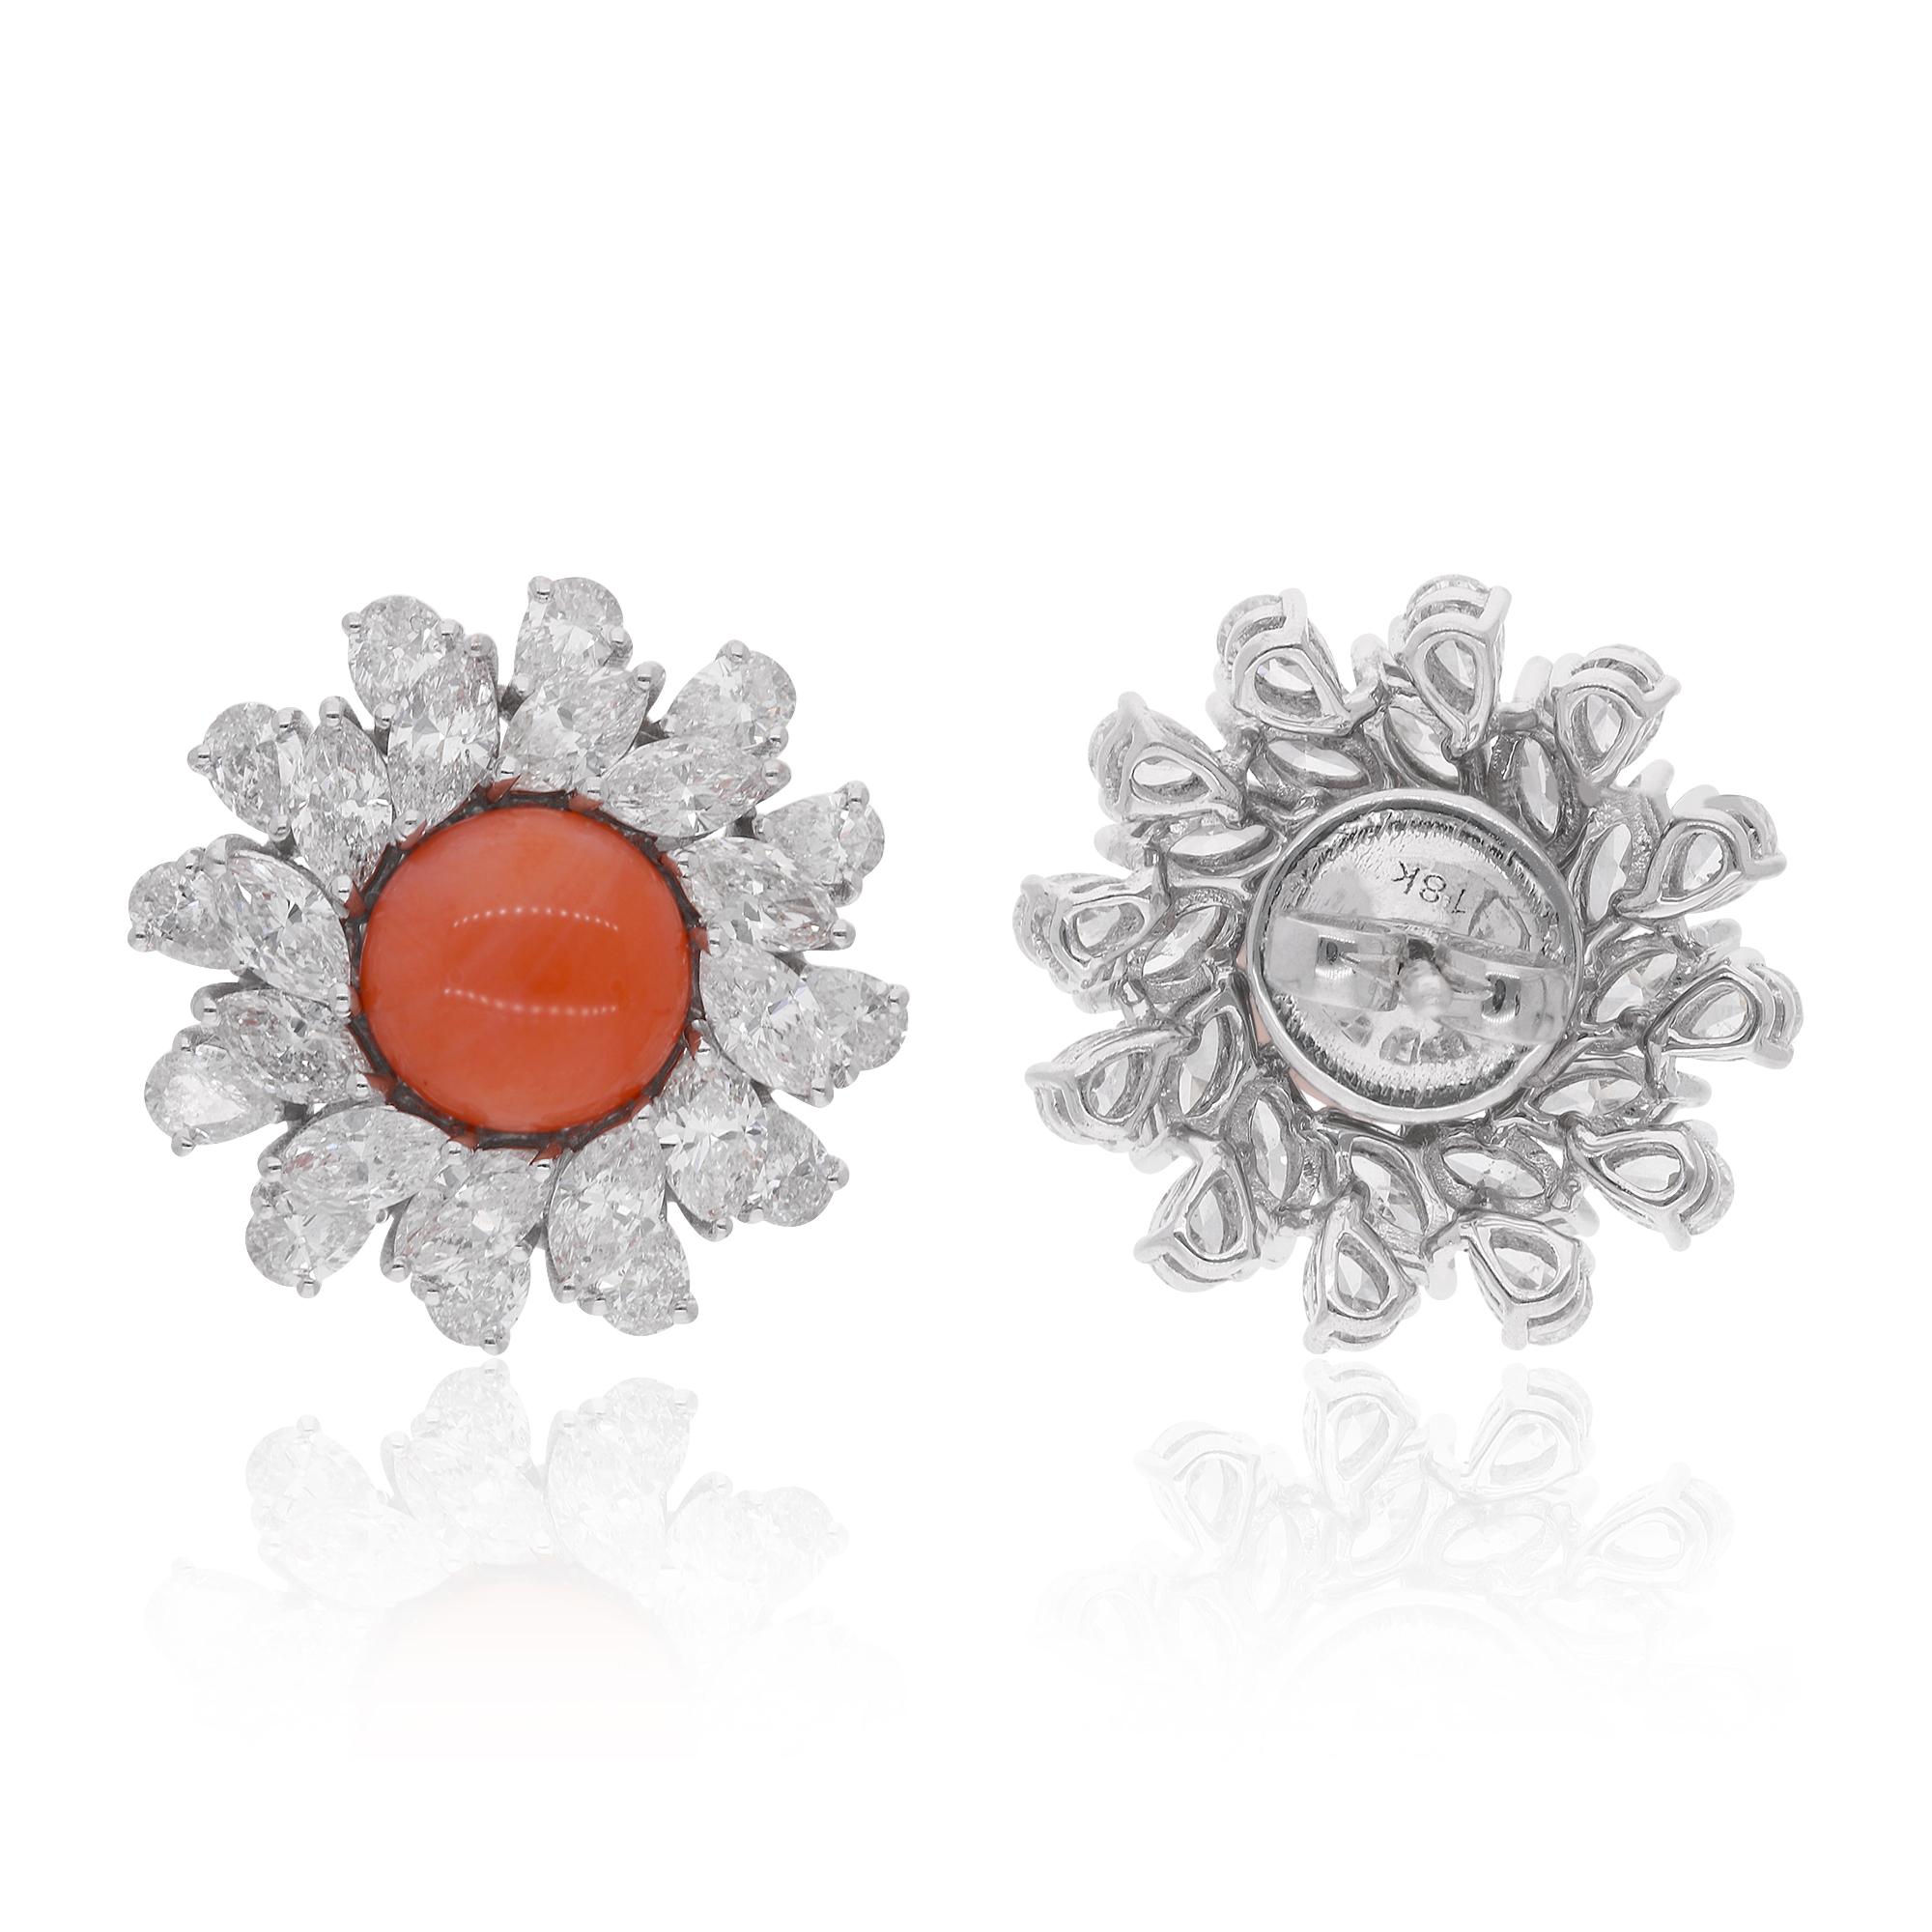 Item Code :- SEE-14165A
Gross Wt. :- 7.00 gm
18k Solid White Gold Wt. :- 5.93 gm
Natural Diamond Wt. :- 3.00 Ct. (AVERAGE DIAMOND CLARITY SI1-SI2 AND COLOR H-I)
Coral Wt. :- 2.37 Ct.
Earrings Size :- 30 mm approx.

✦ Sizing
.....................
We